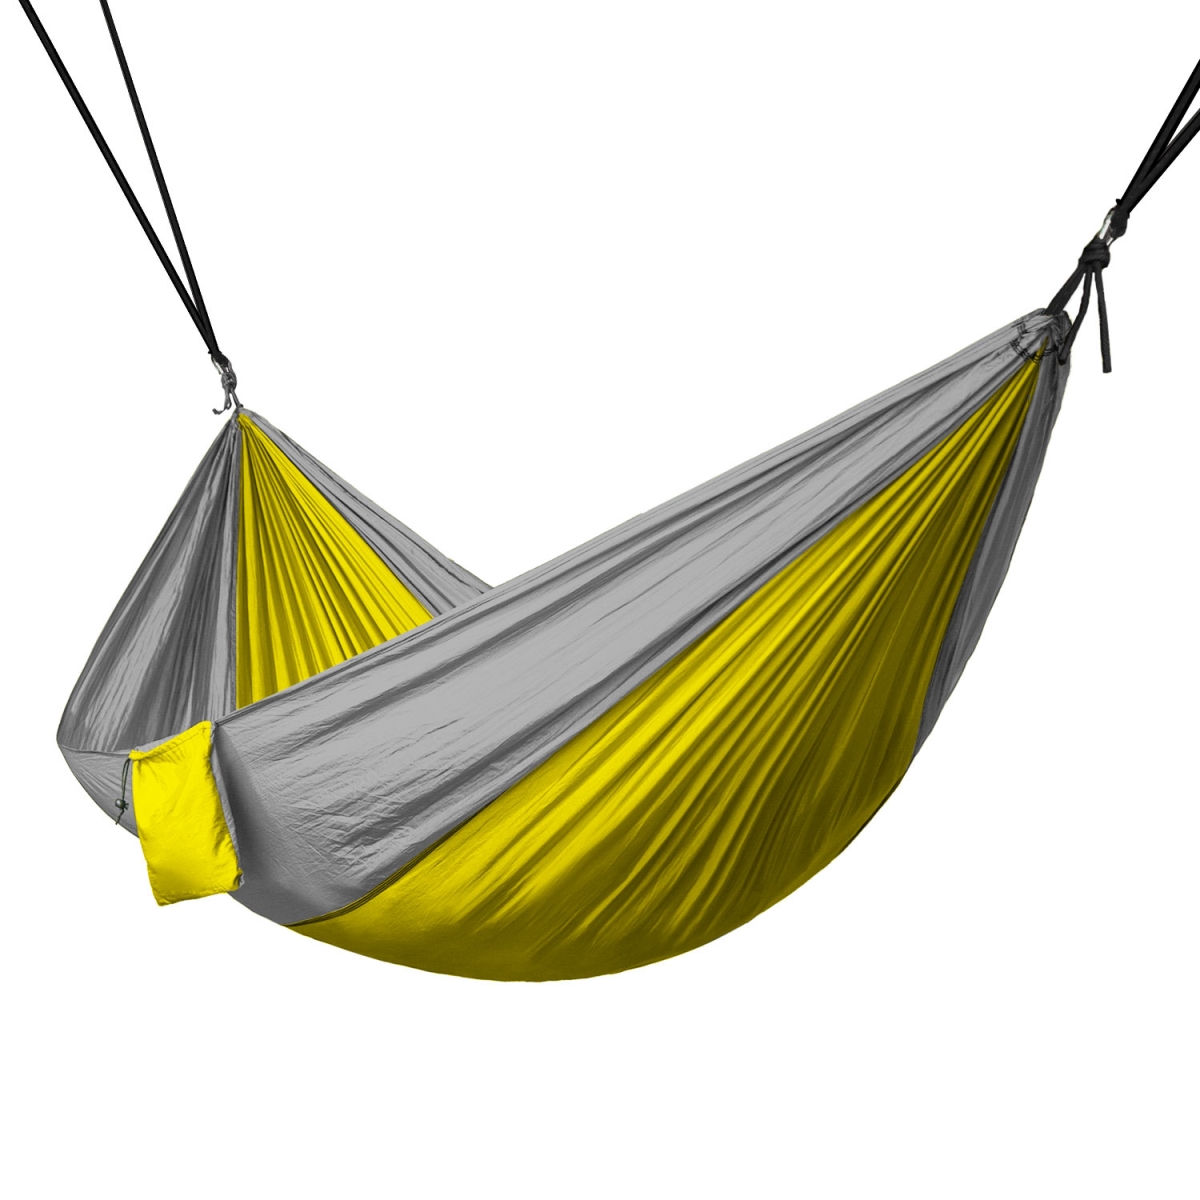 Ham-004 Portable 2 Person Hammock Rope Hanging Swing Fabric Camping Bed - Yellow & Grey